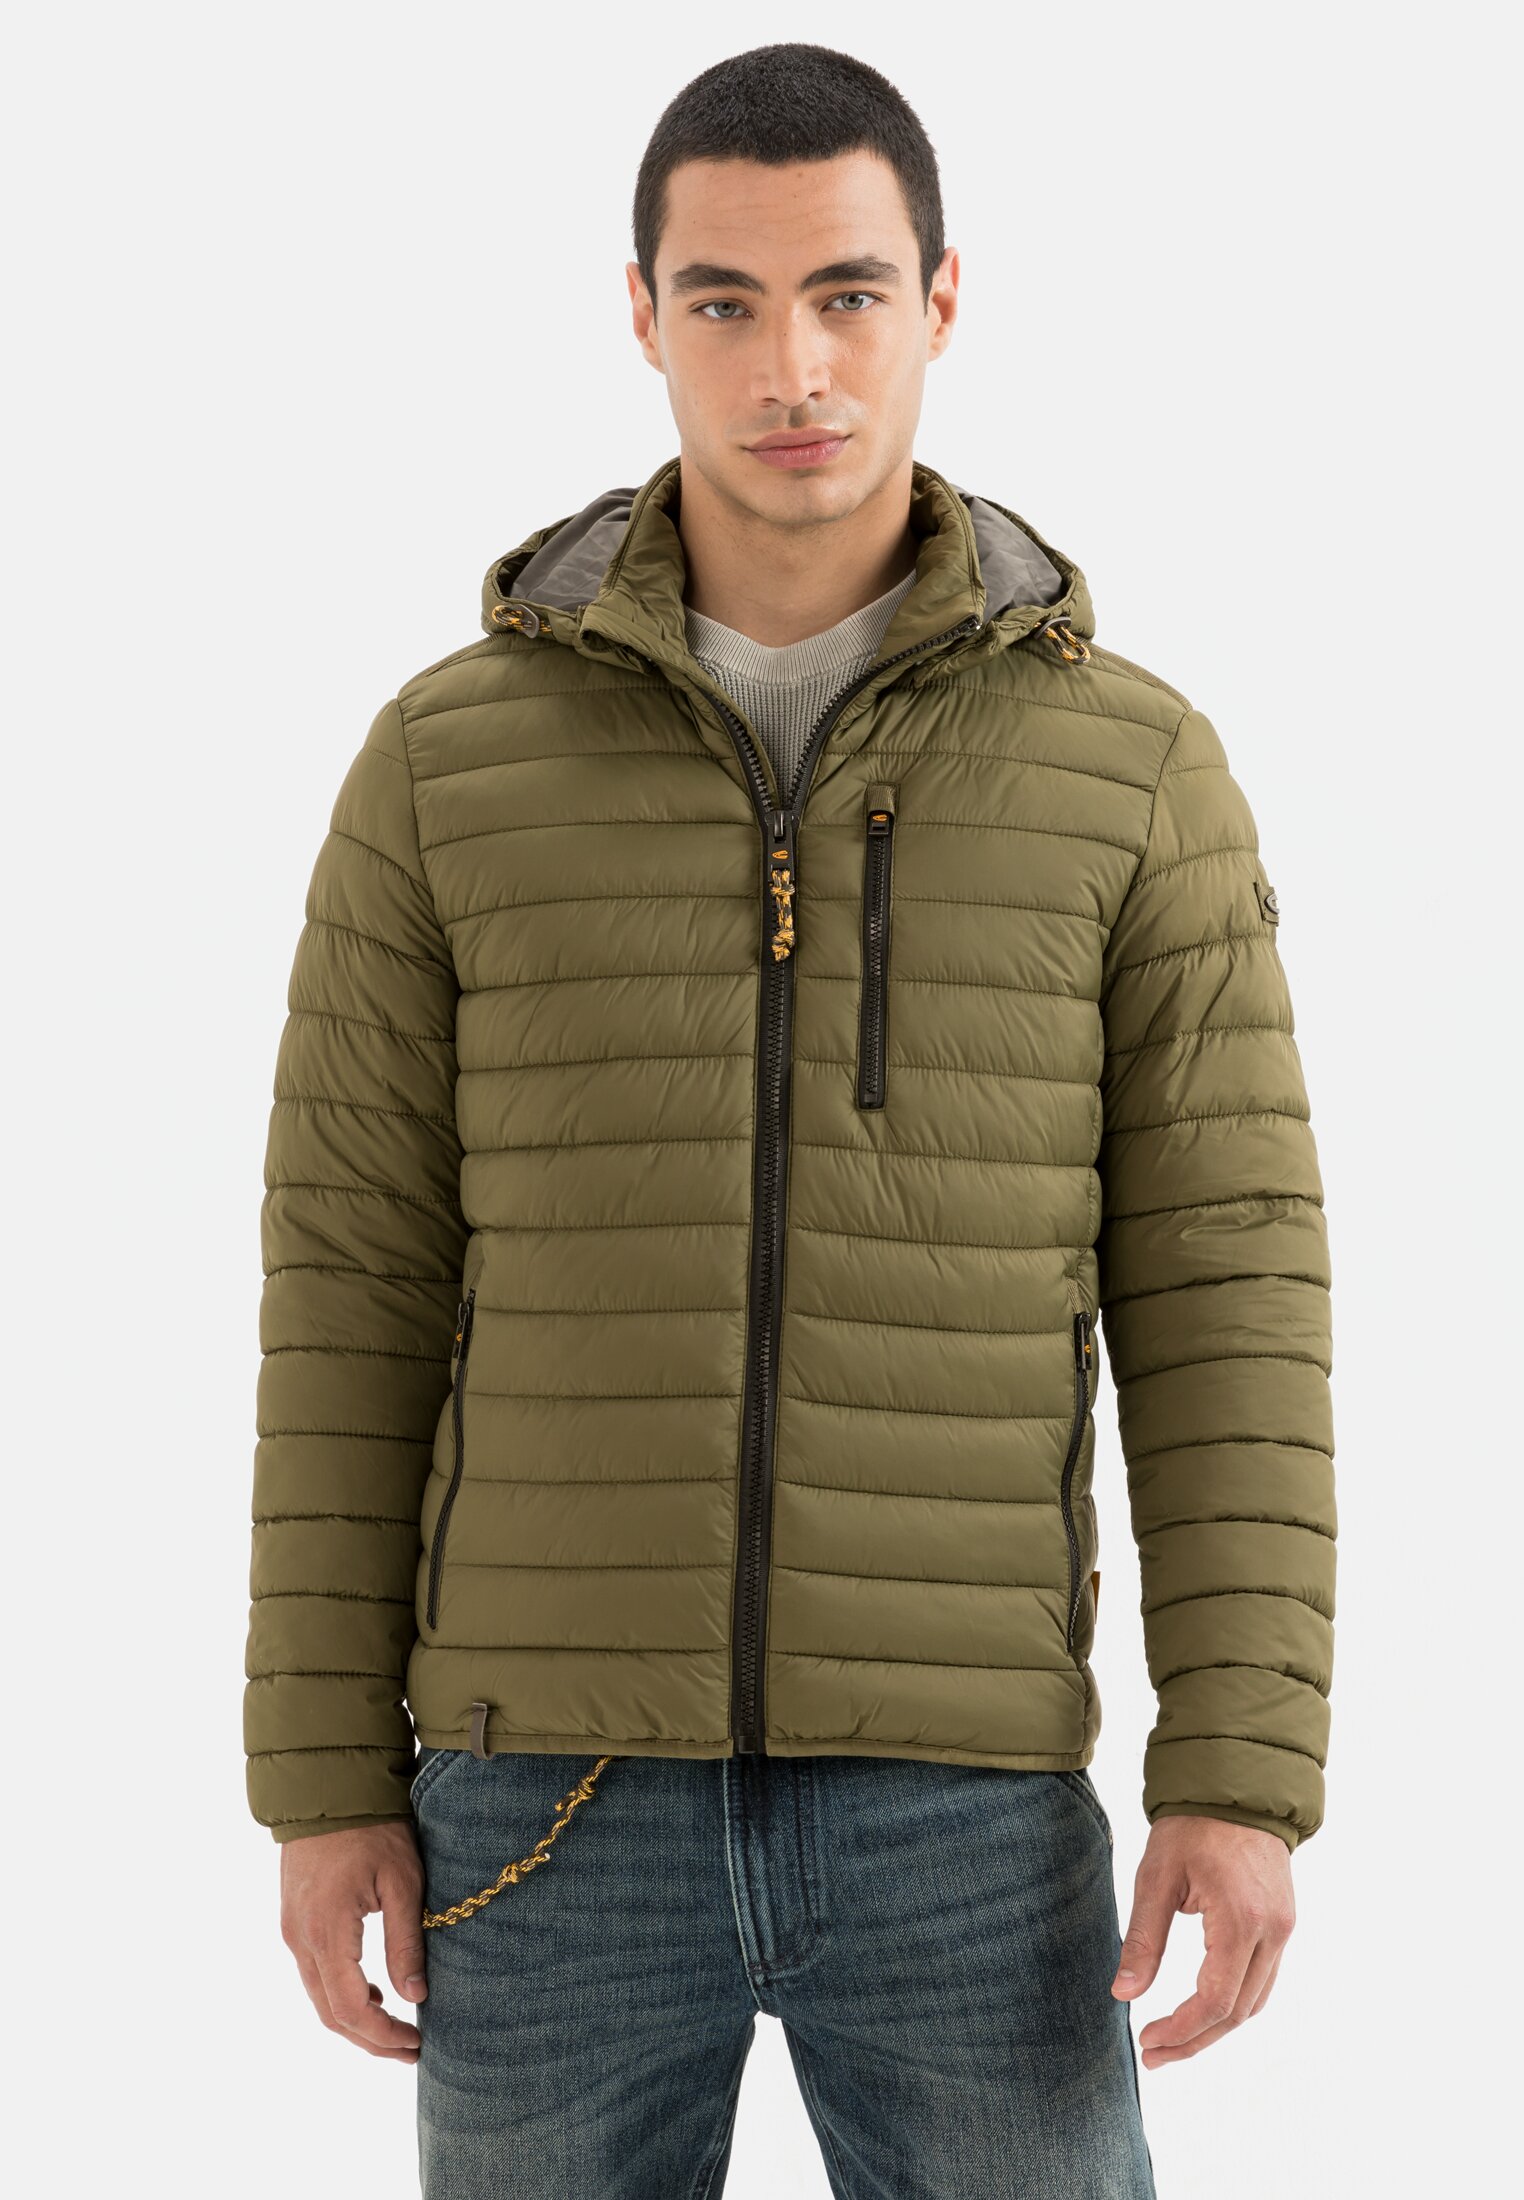 Quilted blouson for camel Brown Herren act 48 in Olive | 